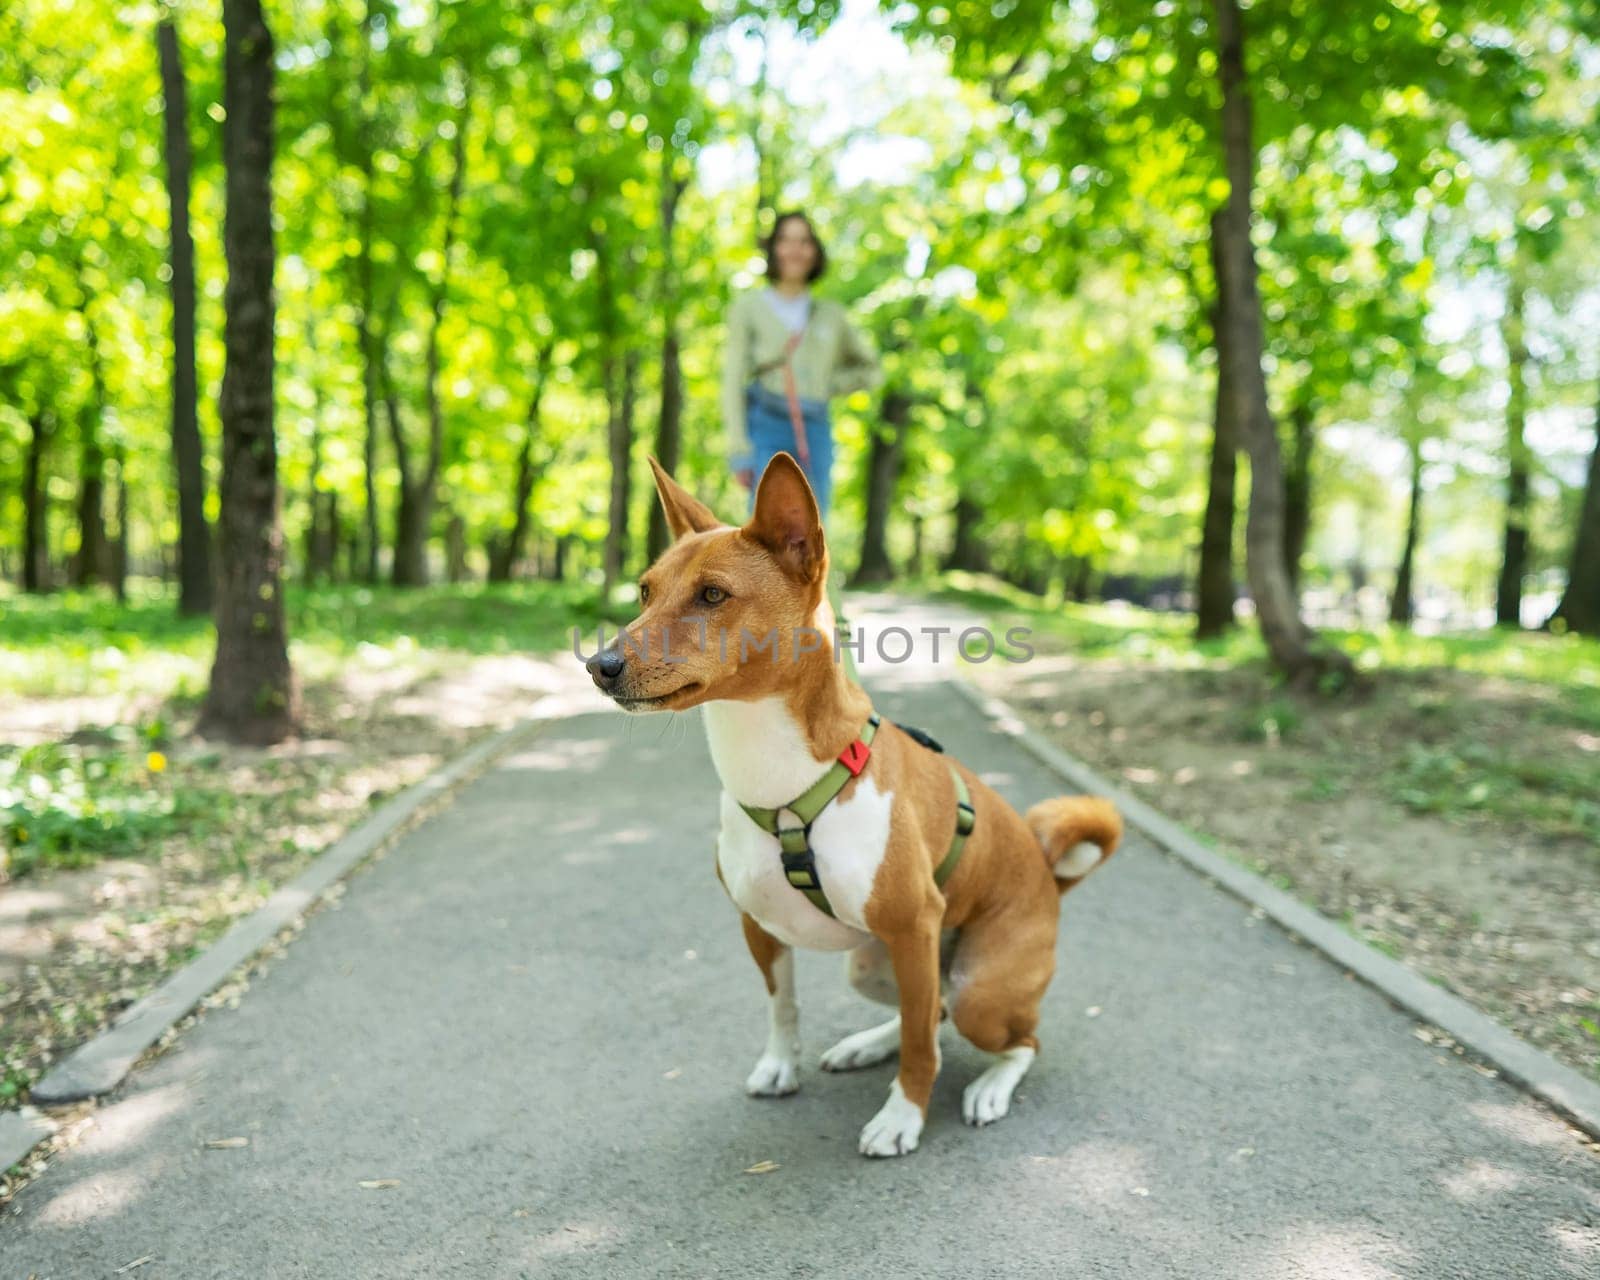 A young woman walks with an African basenji dog on a leash in the park. by mrwed54